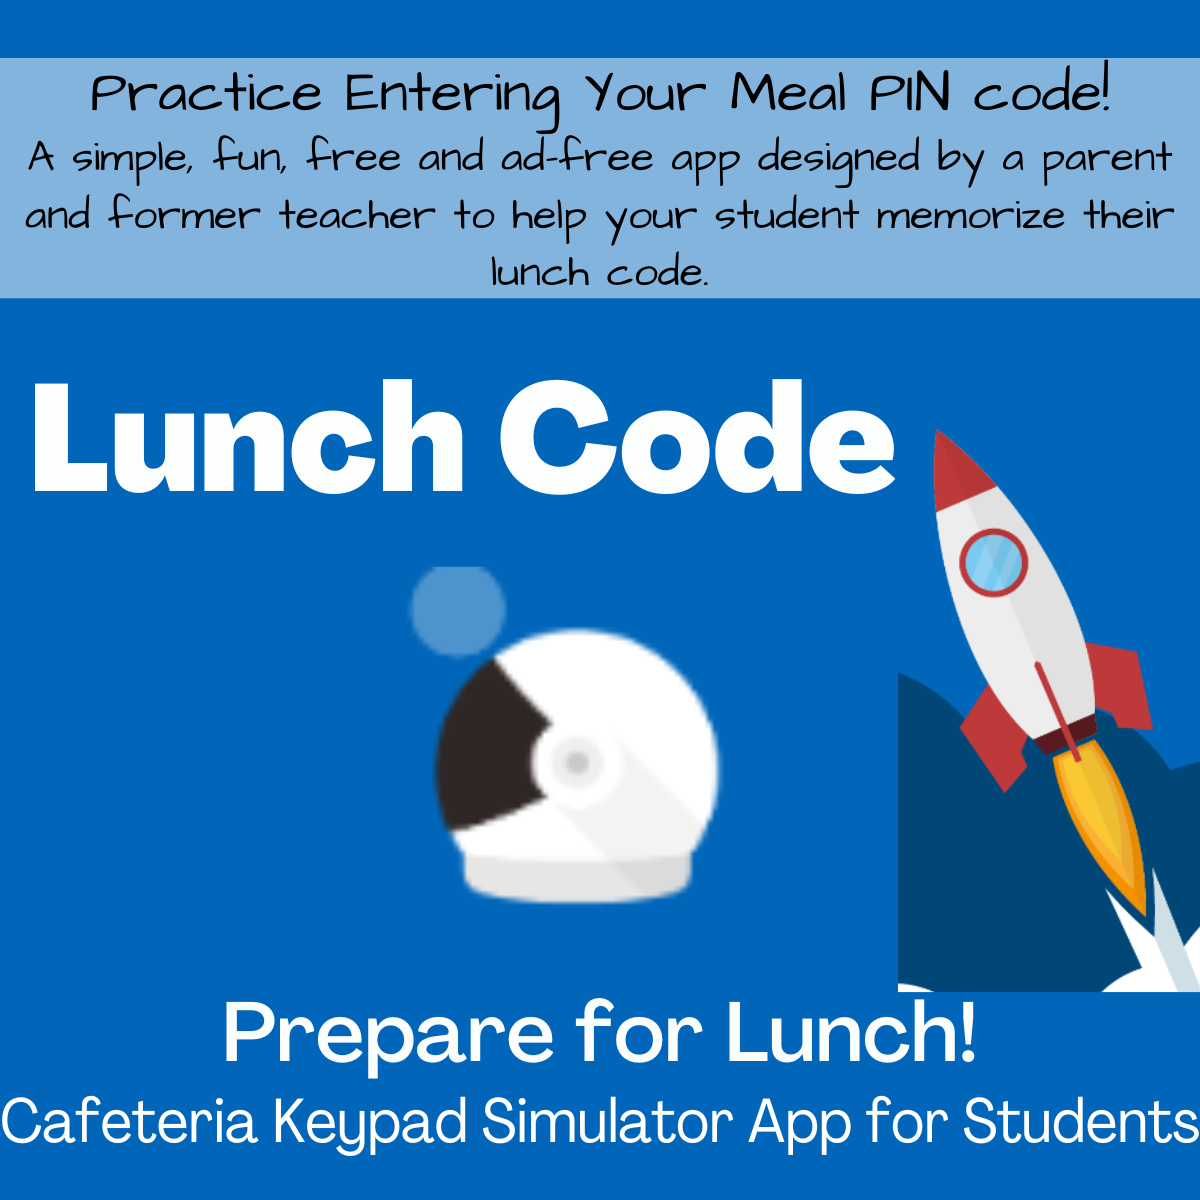 Lunch Code app simulator link to practice entering meal PIN